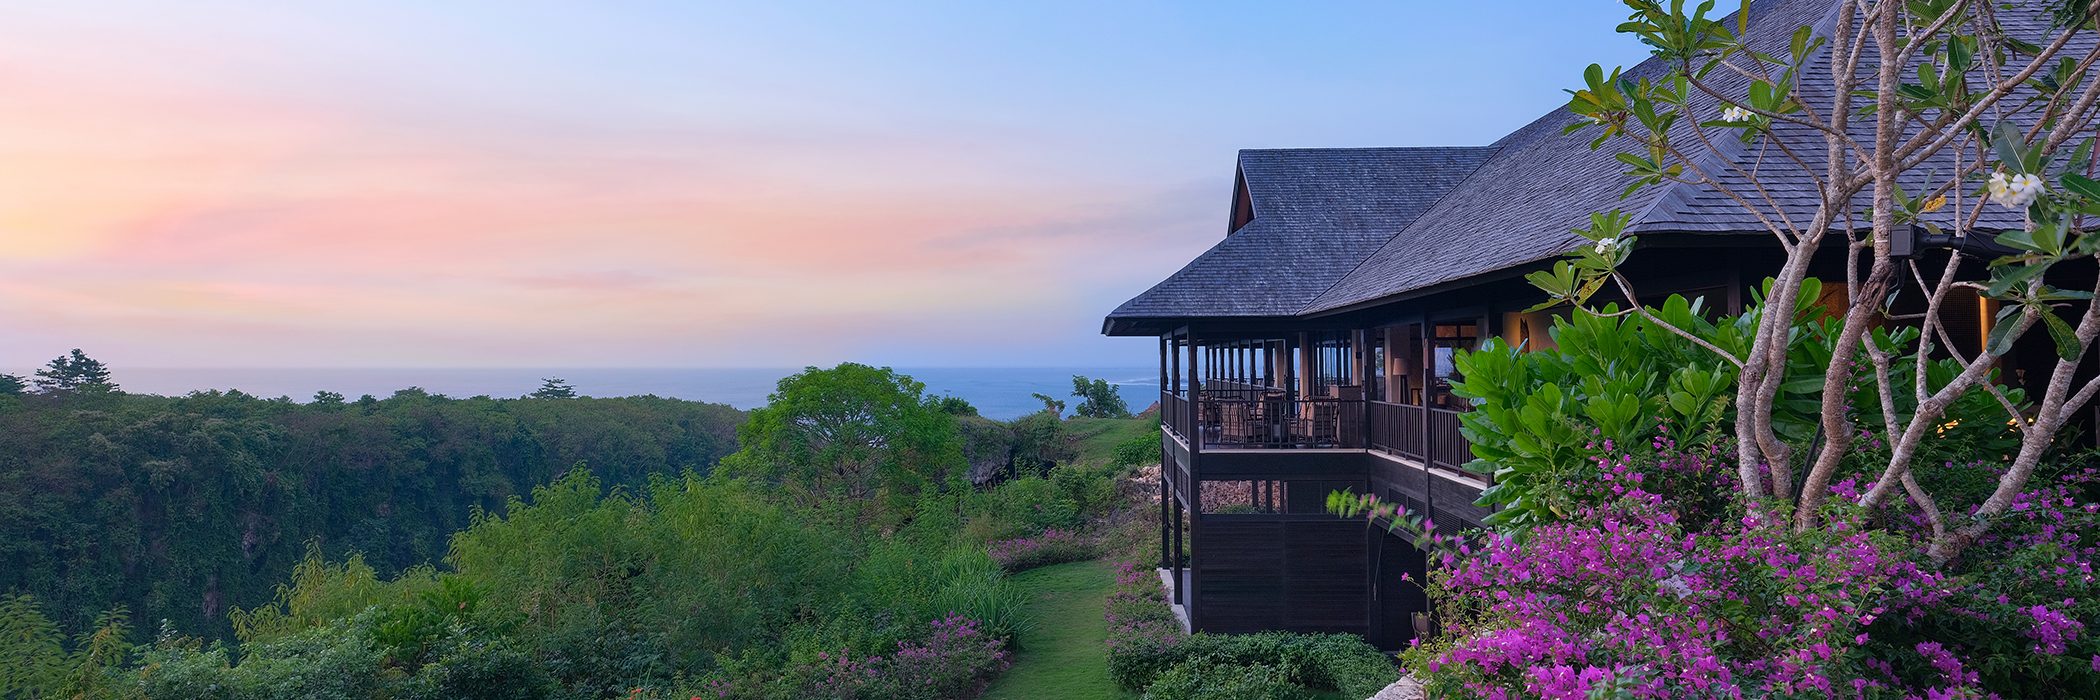 Raffles Bali - Discover The Tranquil Hideaway That’s Sure To Become Bali’s Best-Kept Secret by Condé Nast Traveller Magazine